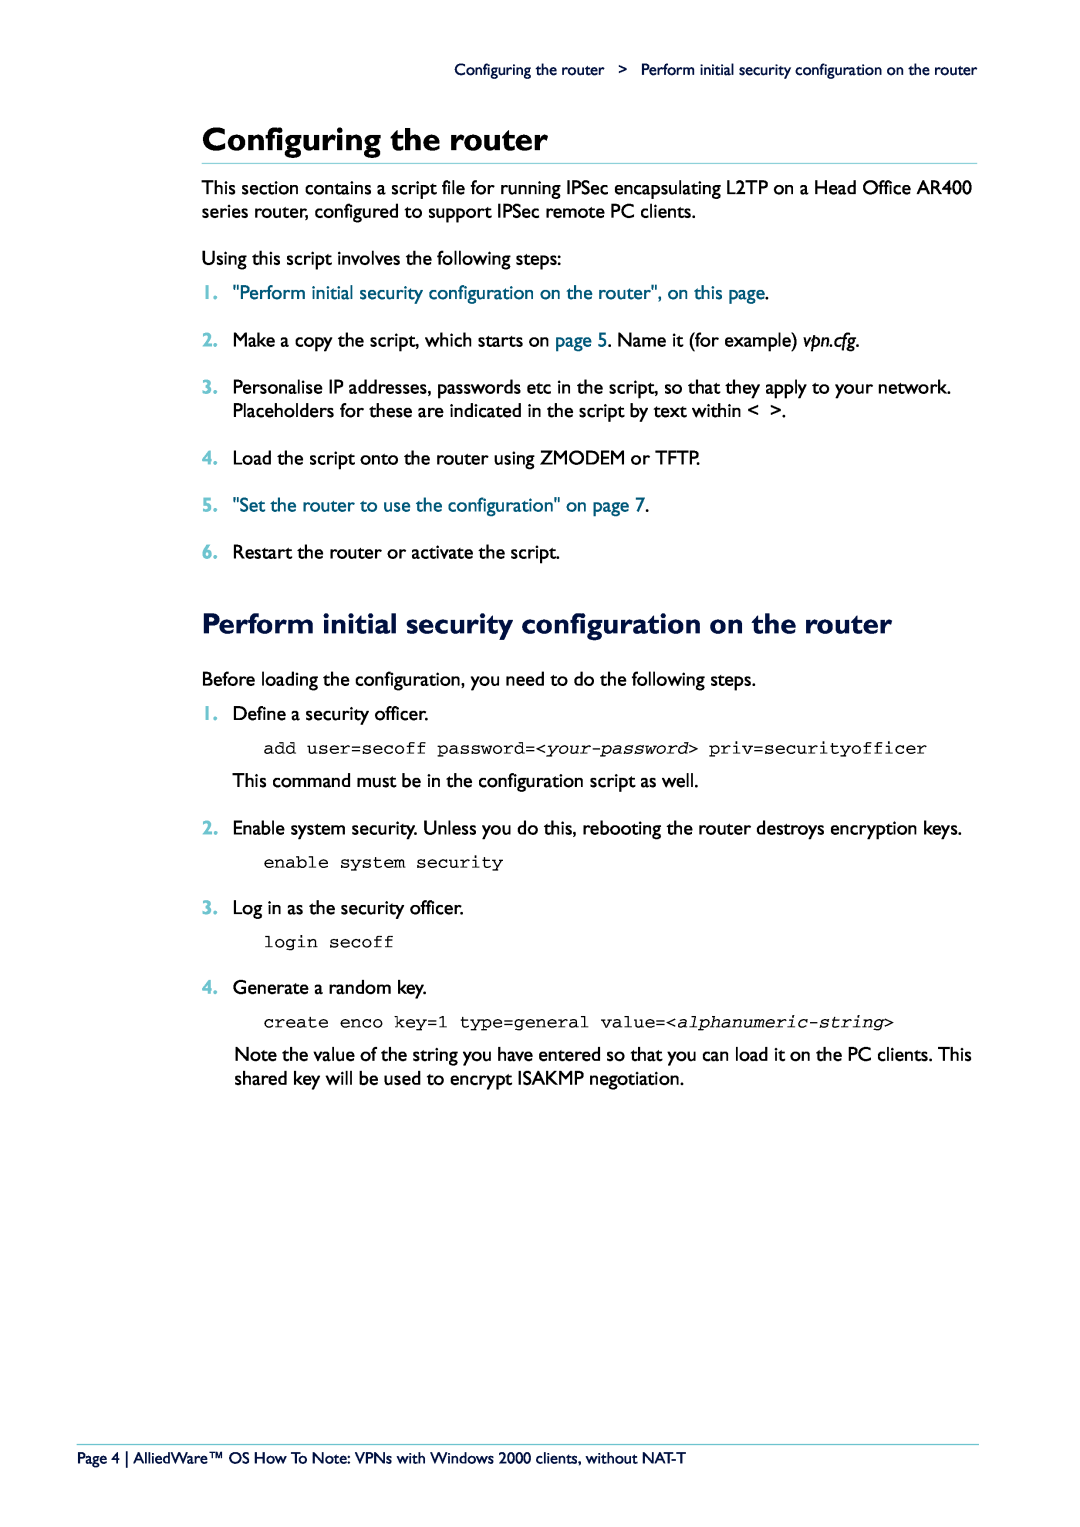 Allied Telesis VPN manual Configuring the router, Perform initial security configuration on the router 